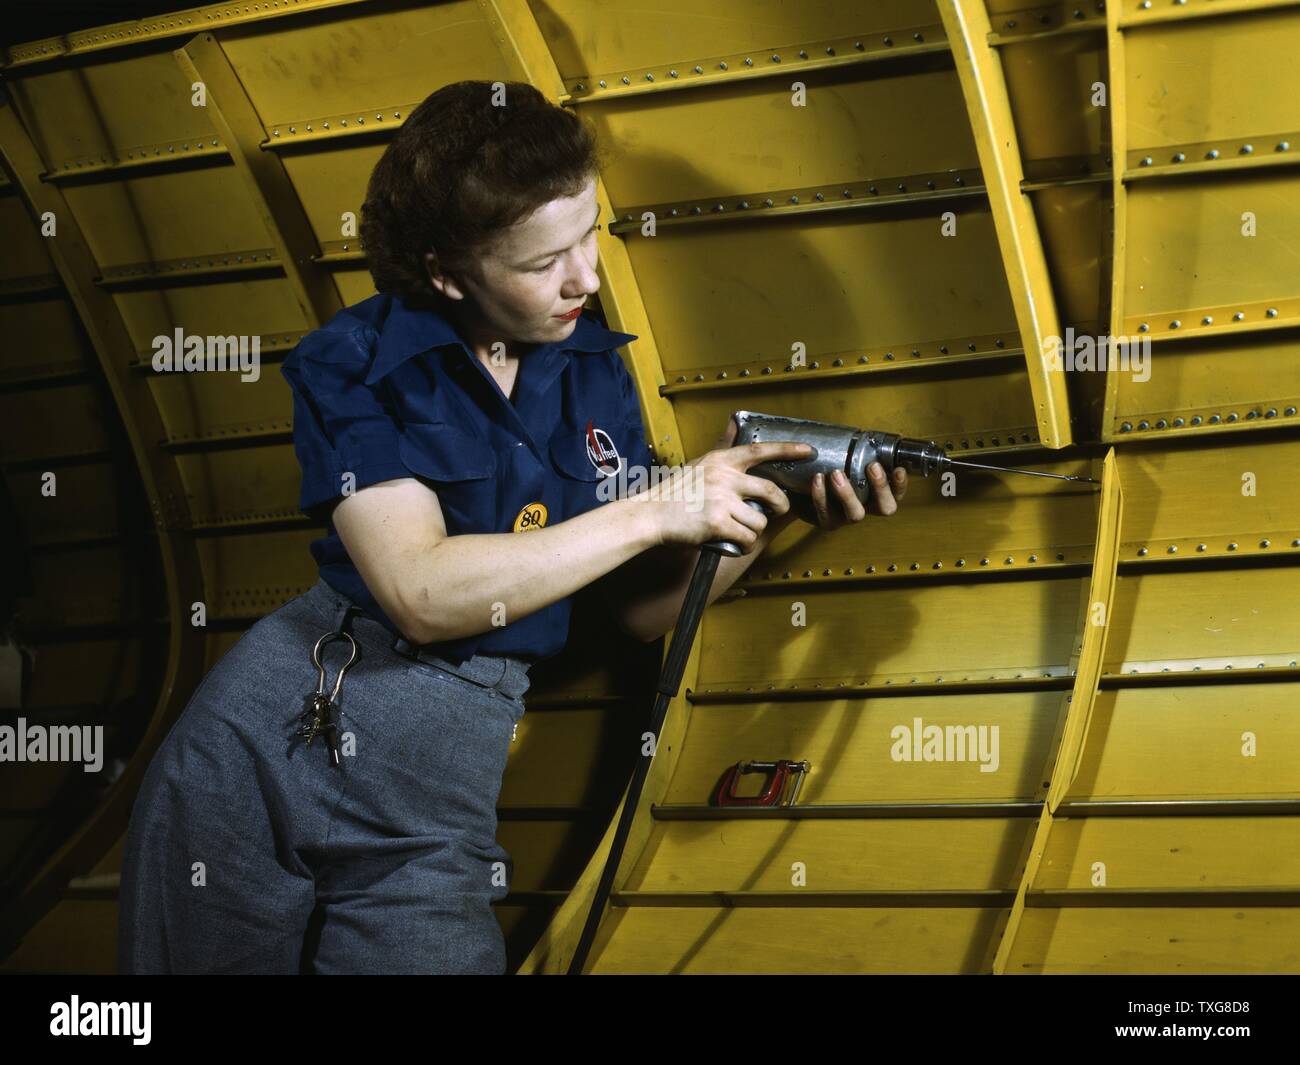 Female aviation worker using a rivet gun on the interior of a USAF aircraft during World War II Stock Photo